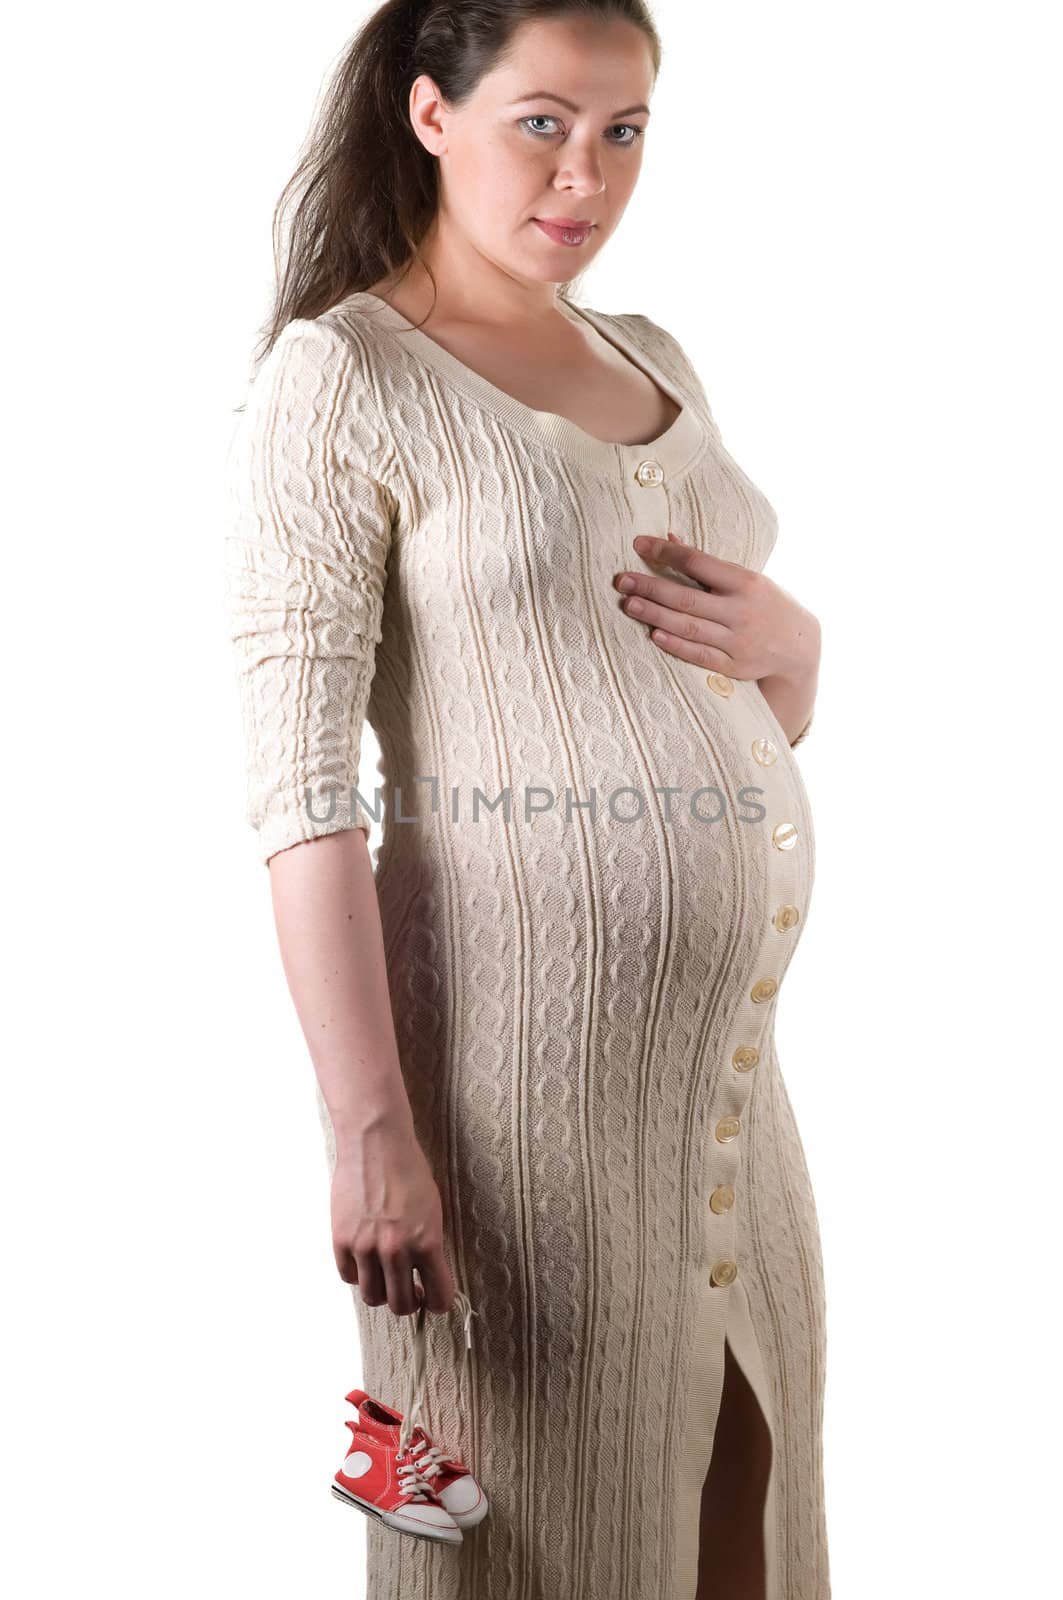 Pregnant woman by anytka